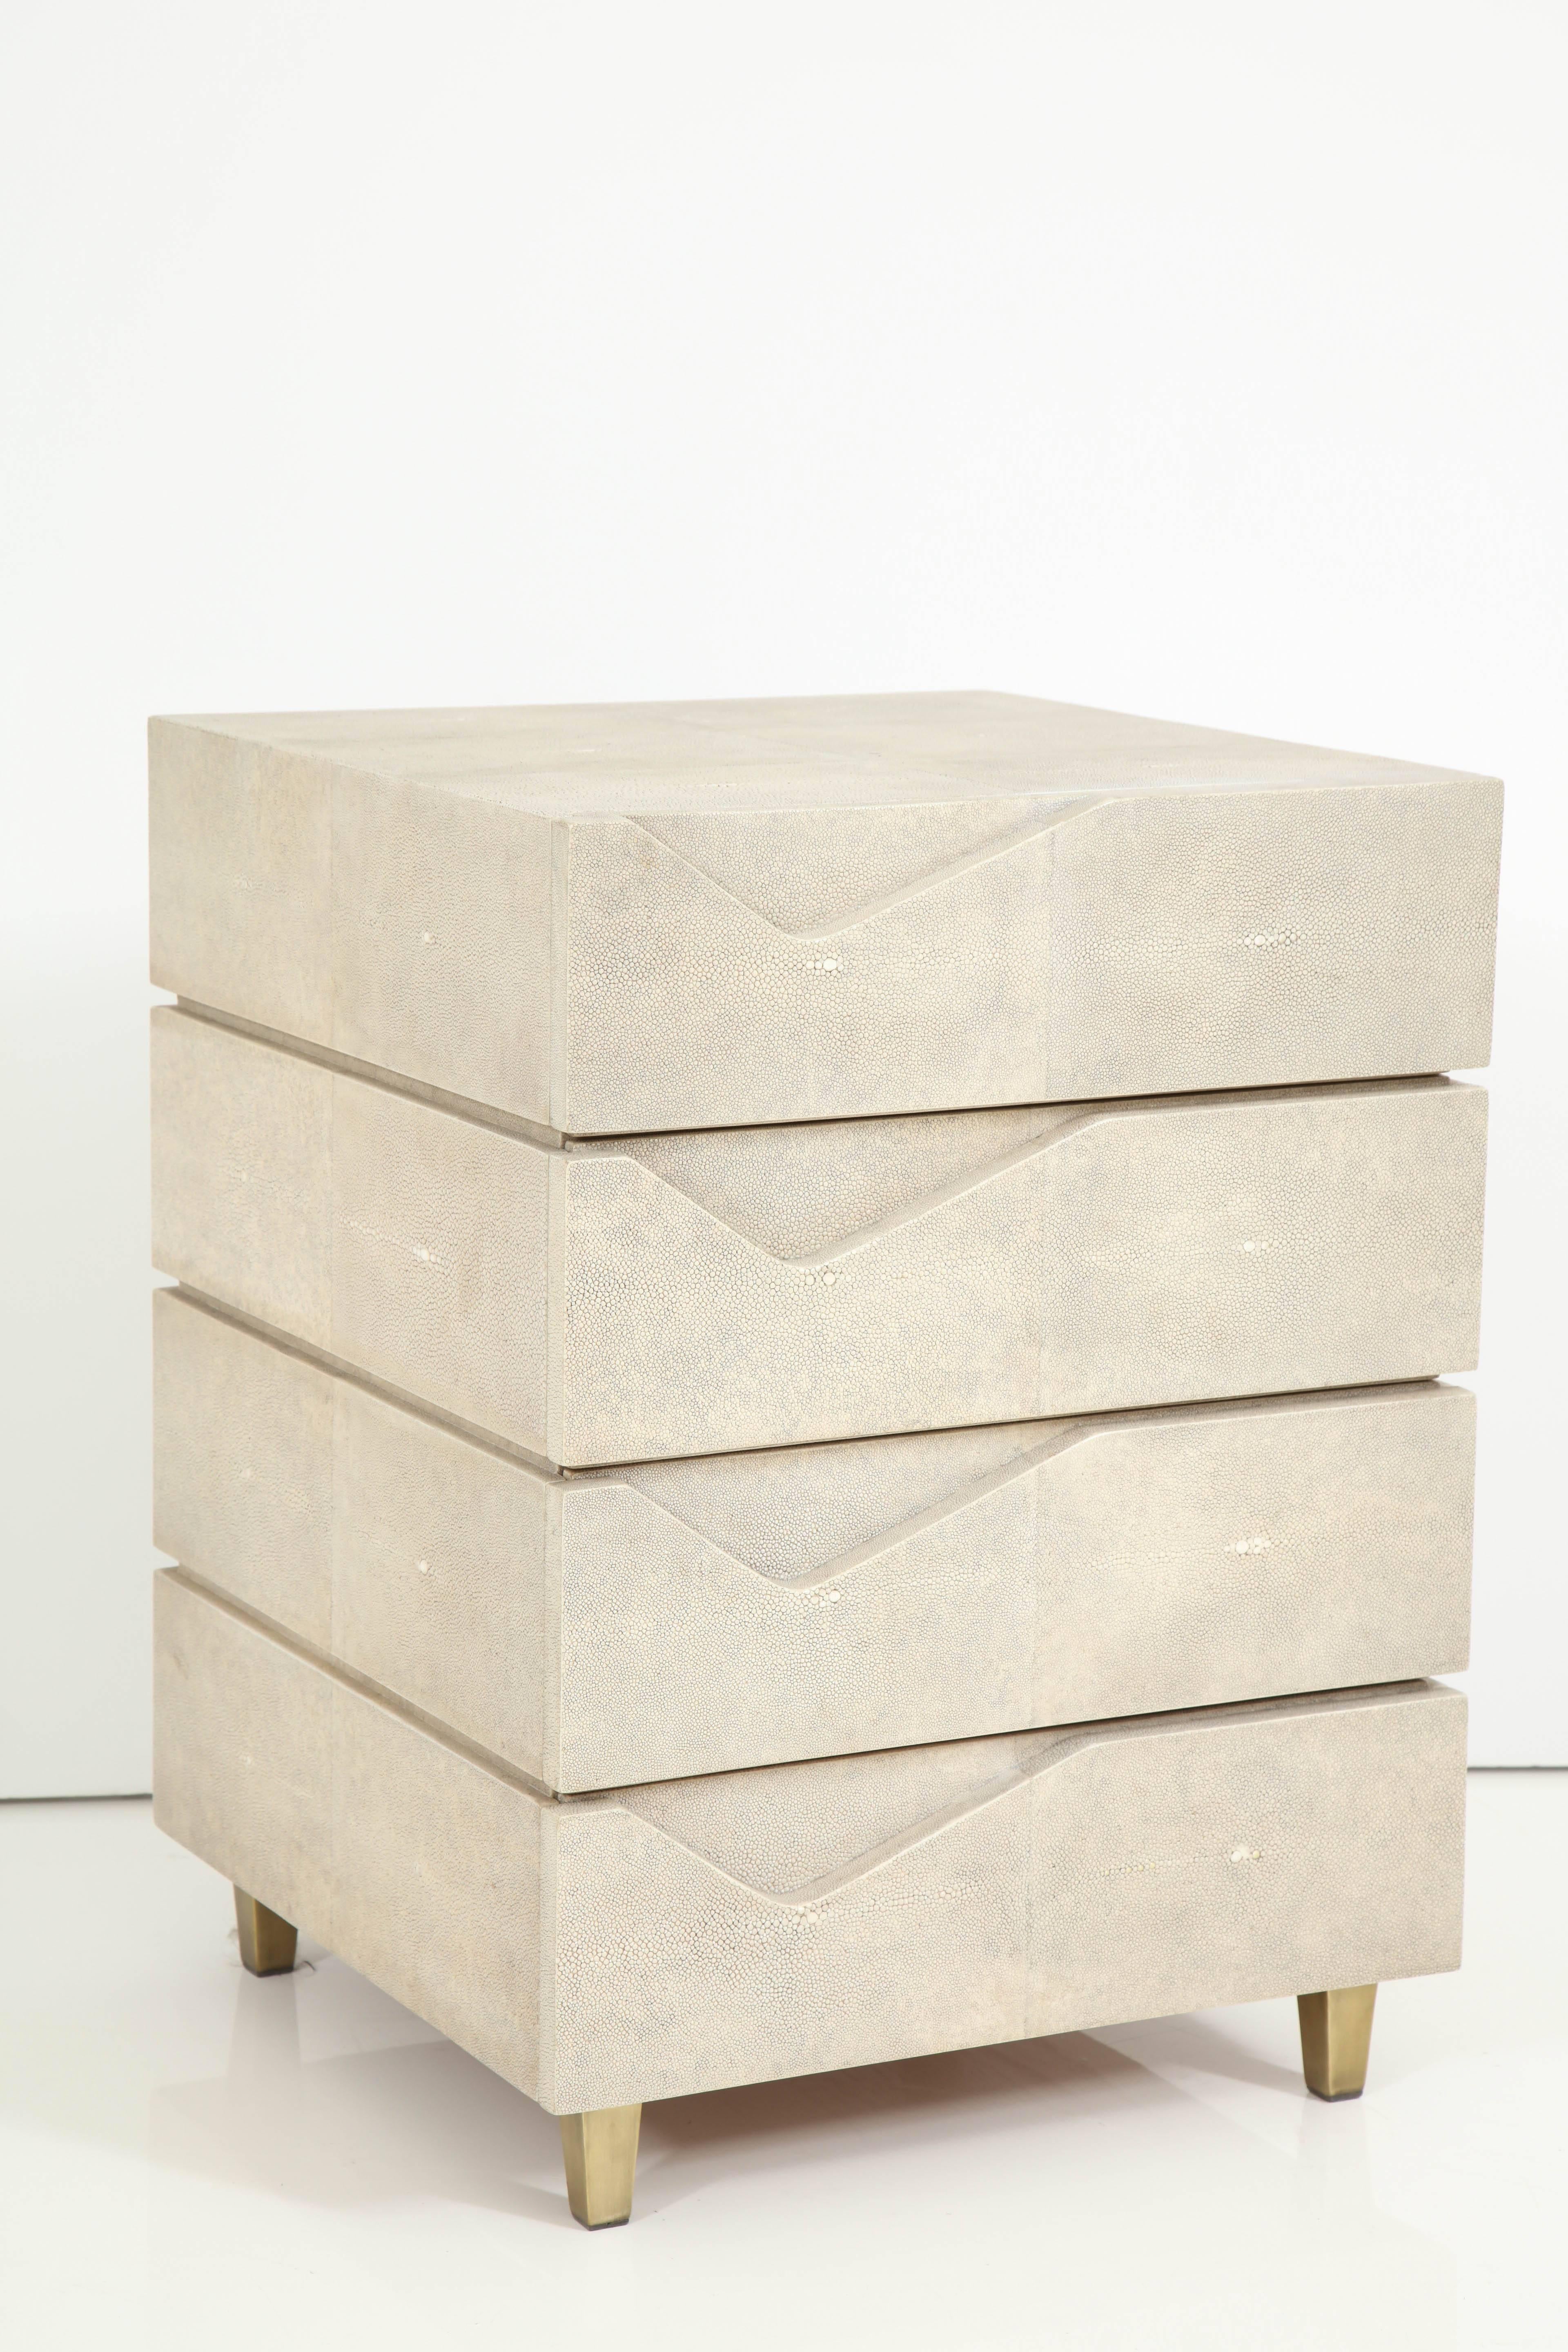 Decorative four-drawer side table made of cream color shagreen and bronze legs. We have two of these side tables in stock.